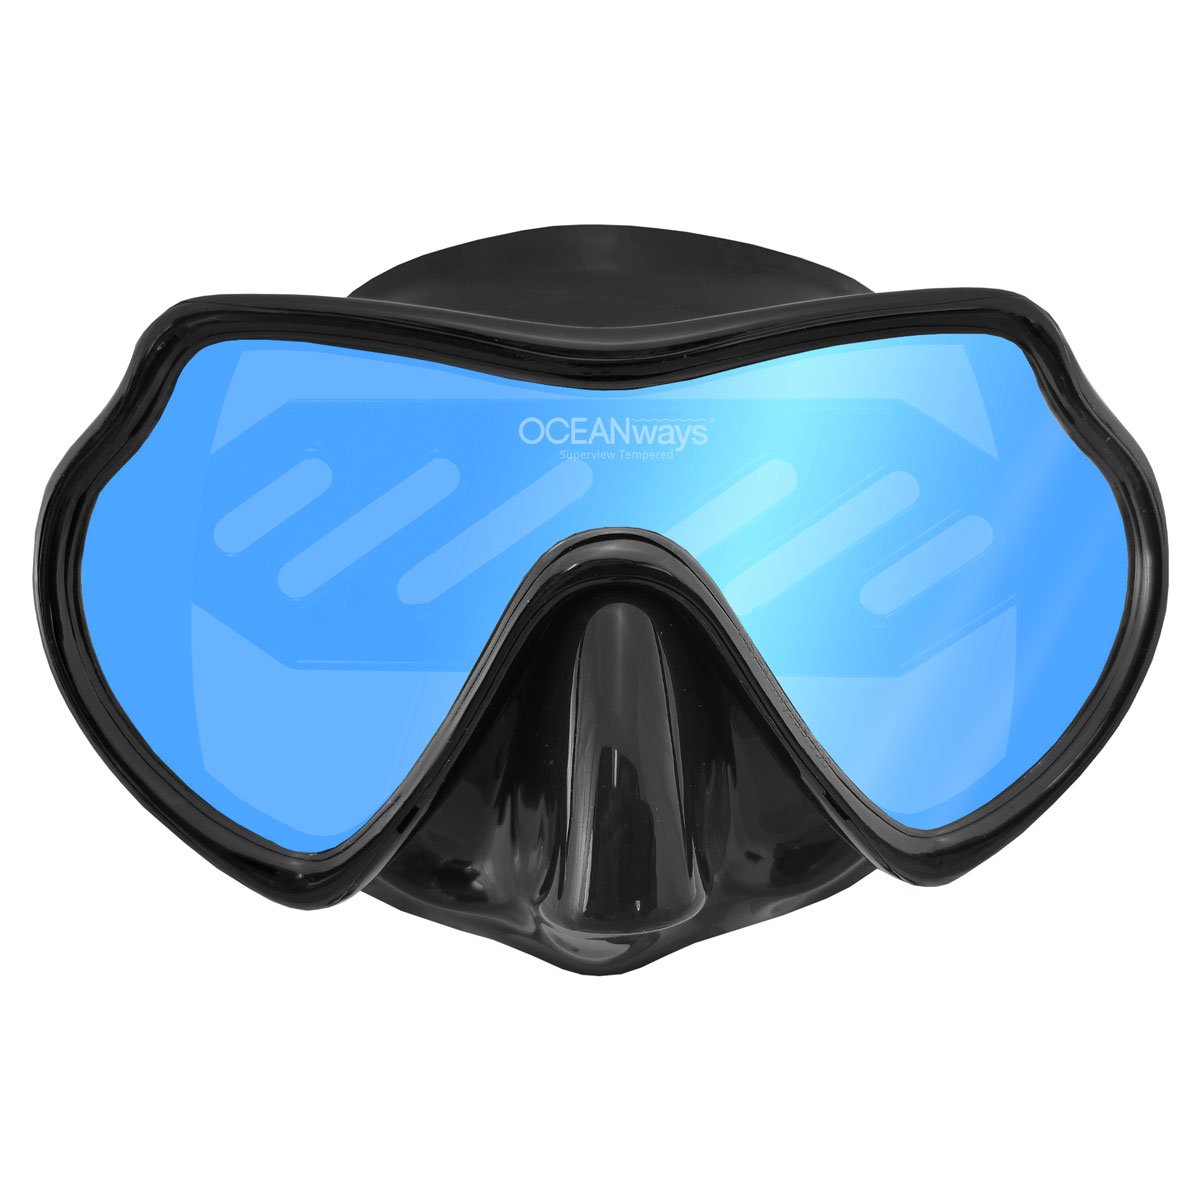 Oceanways SuperView AccuColor Rose Tint Dive Mask